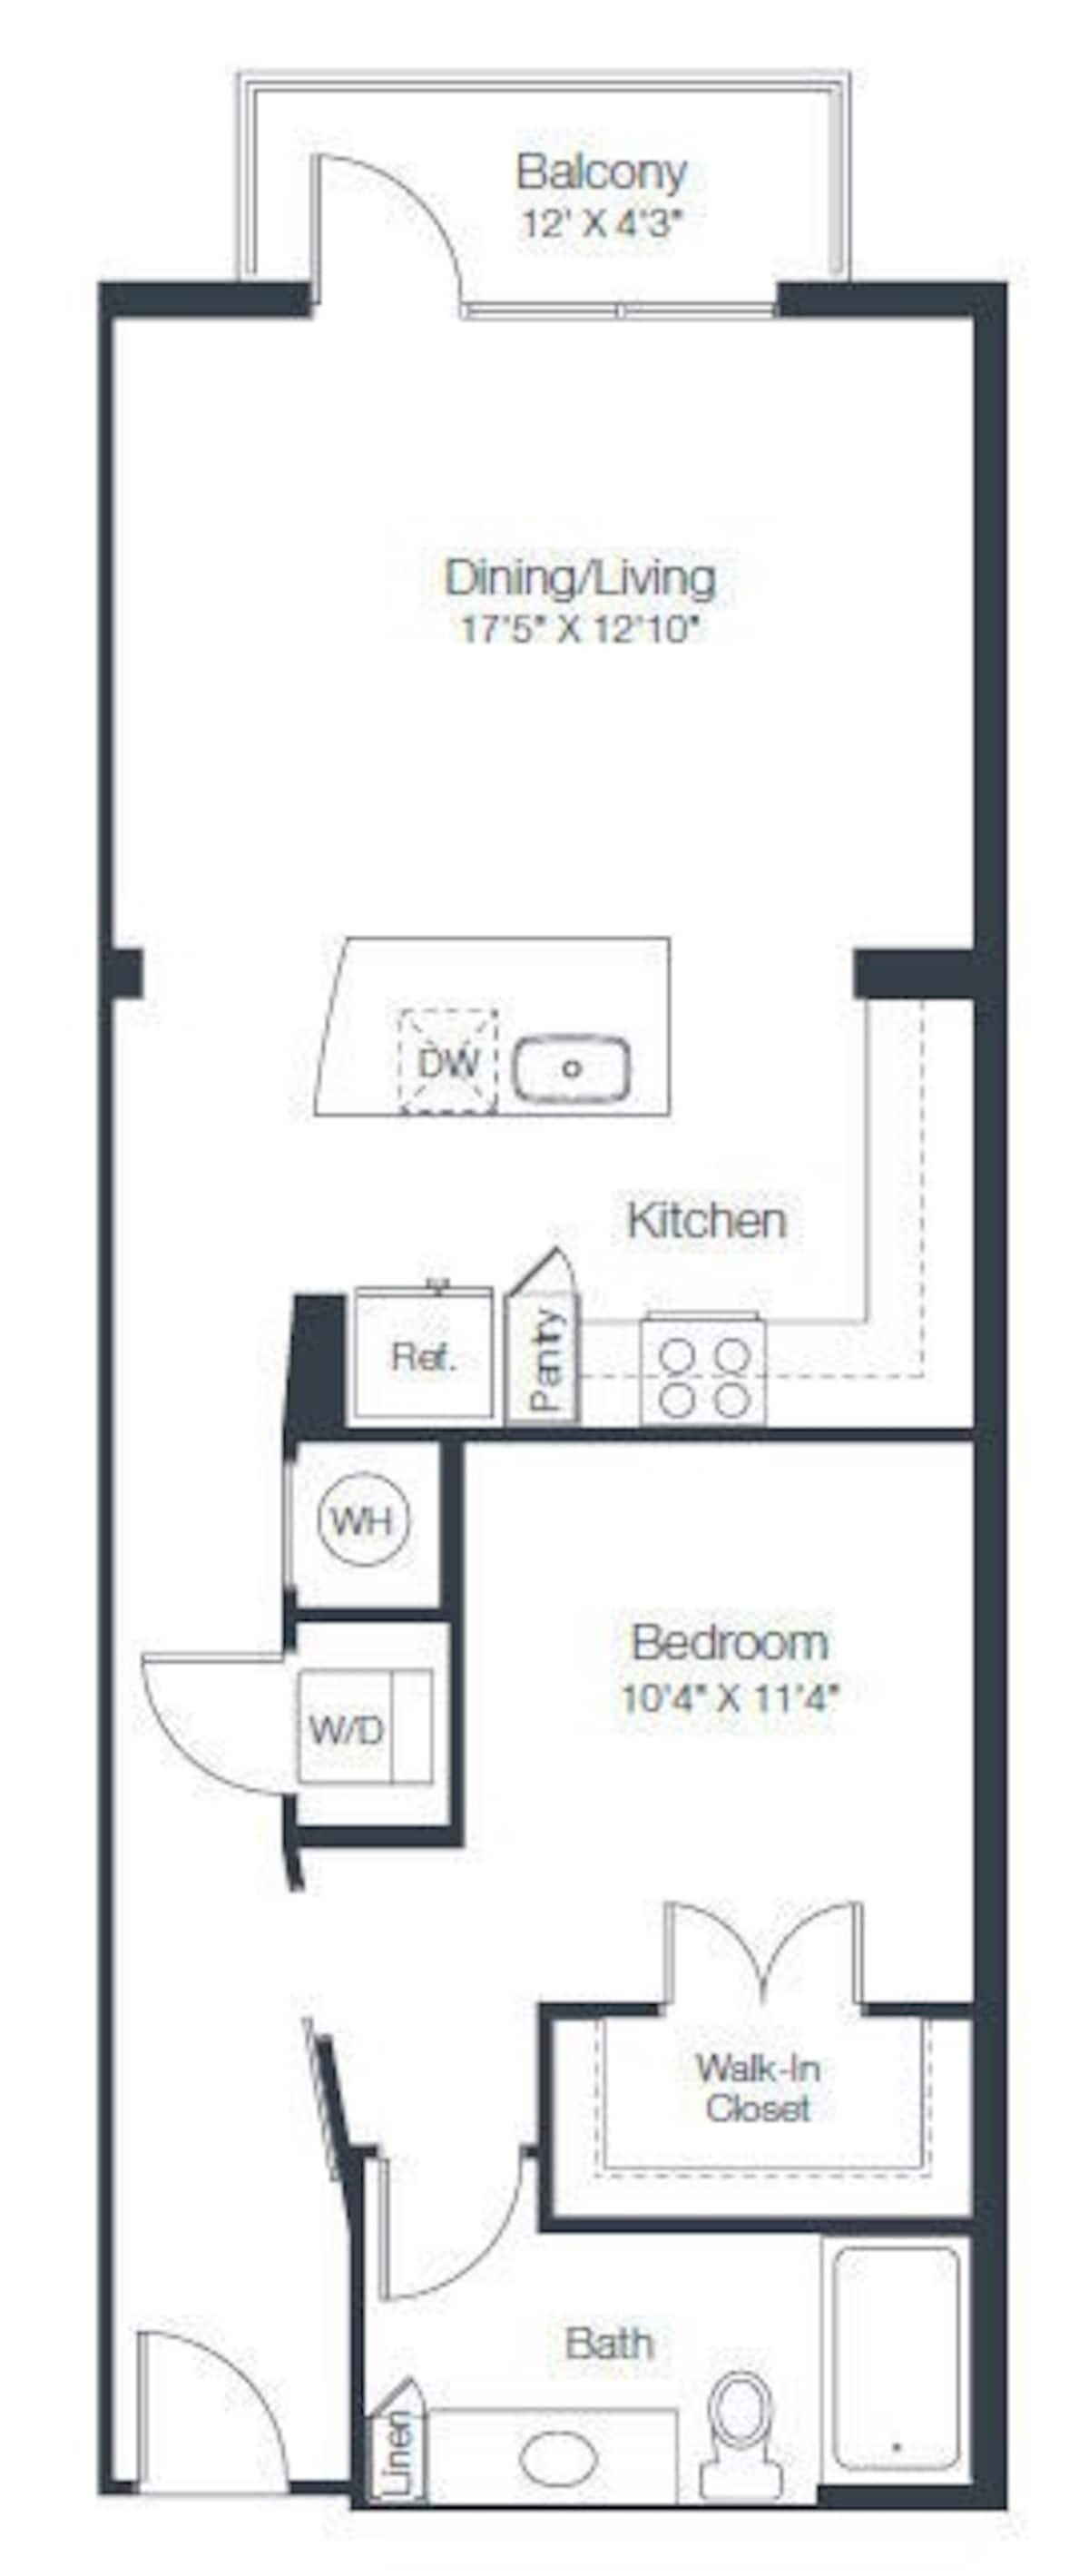 Floorplan diagram for A3a, showing 1 bedroom